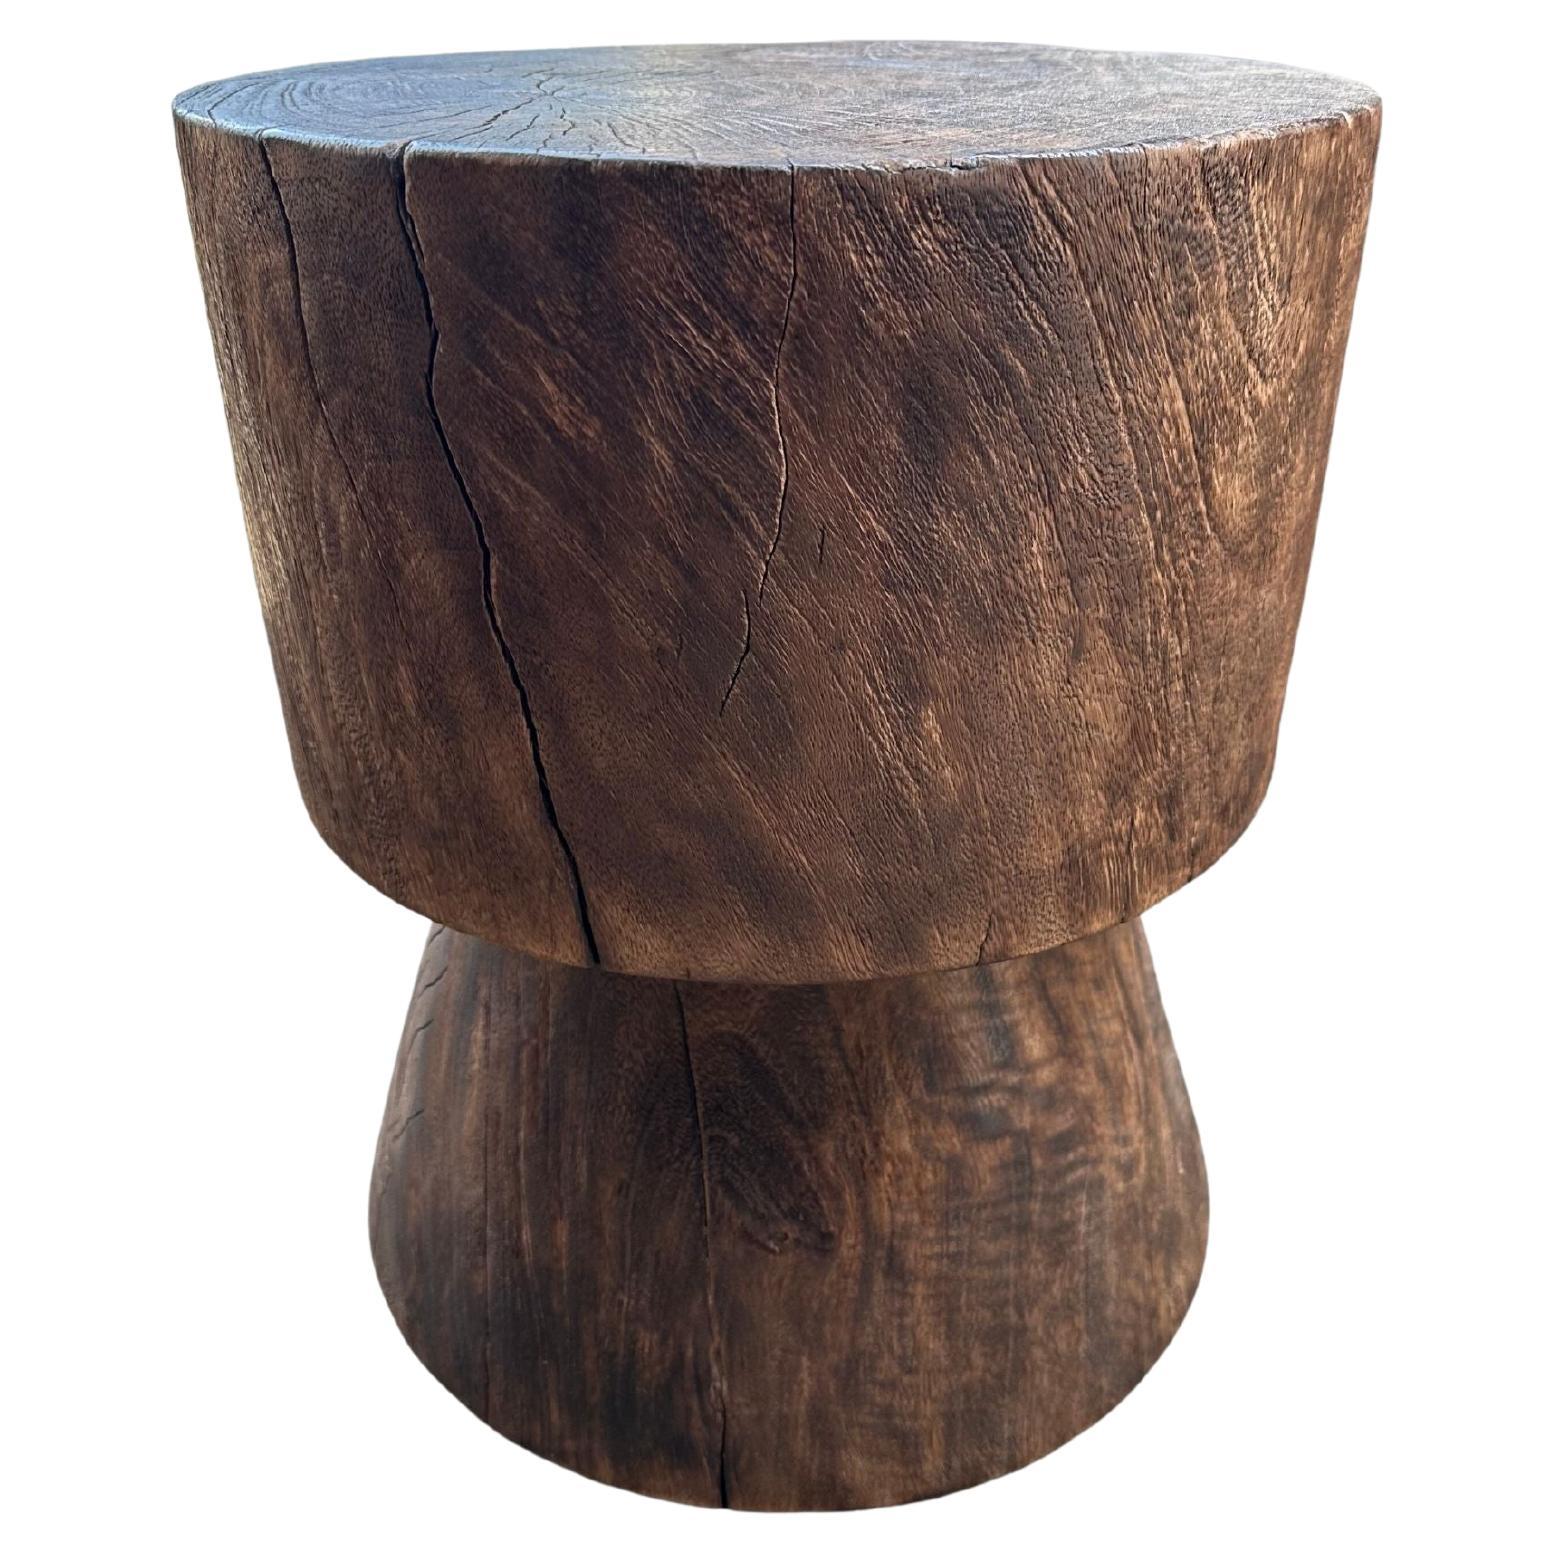 Solid Mango Wood Side Table with Espresso Finish, Modern Organic For Sale